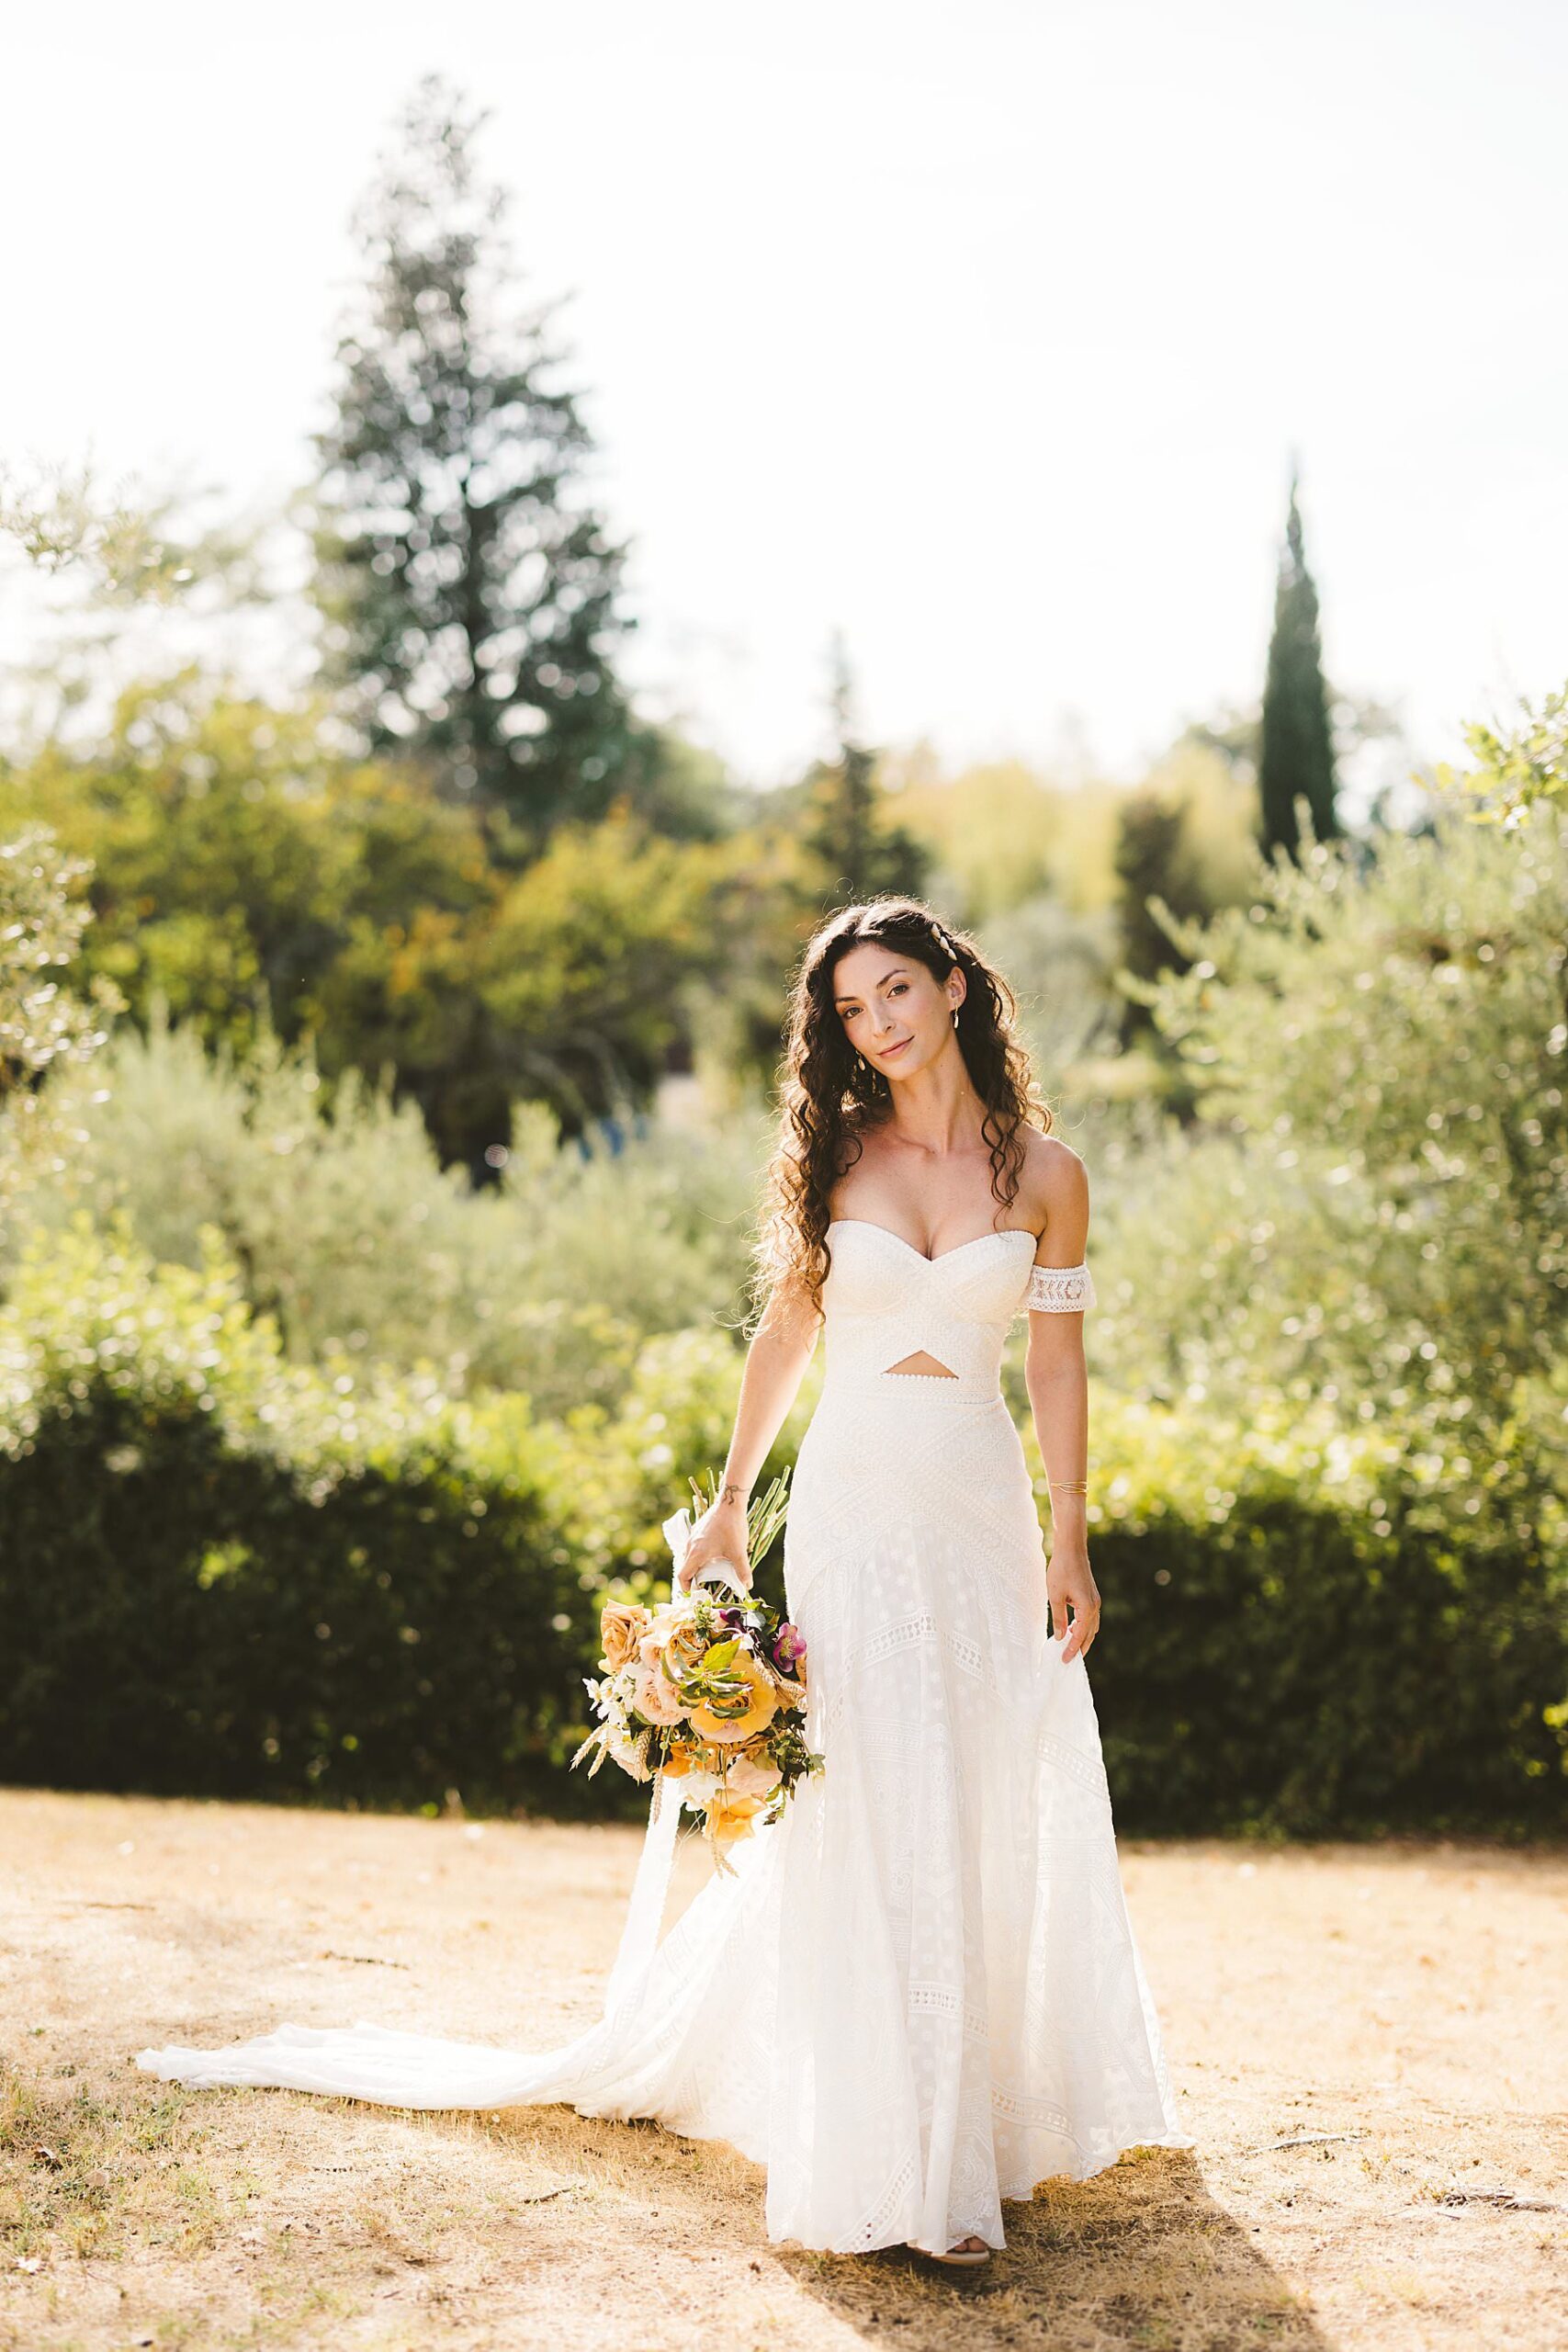 Sweet and elegant bride portrait just before to walk the aisle for the intimate wedding ceremony at La Valle farmhouse in Montaione